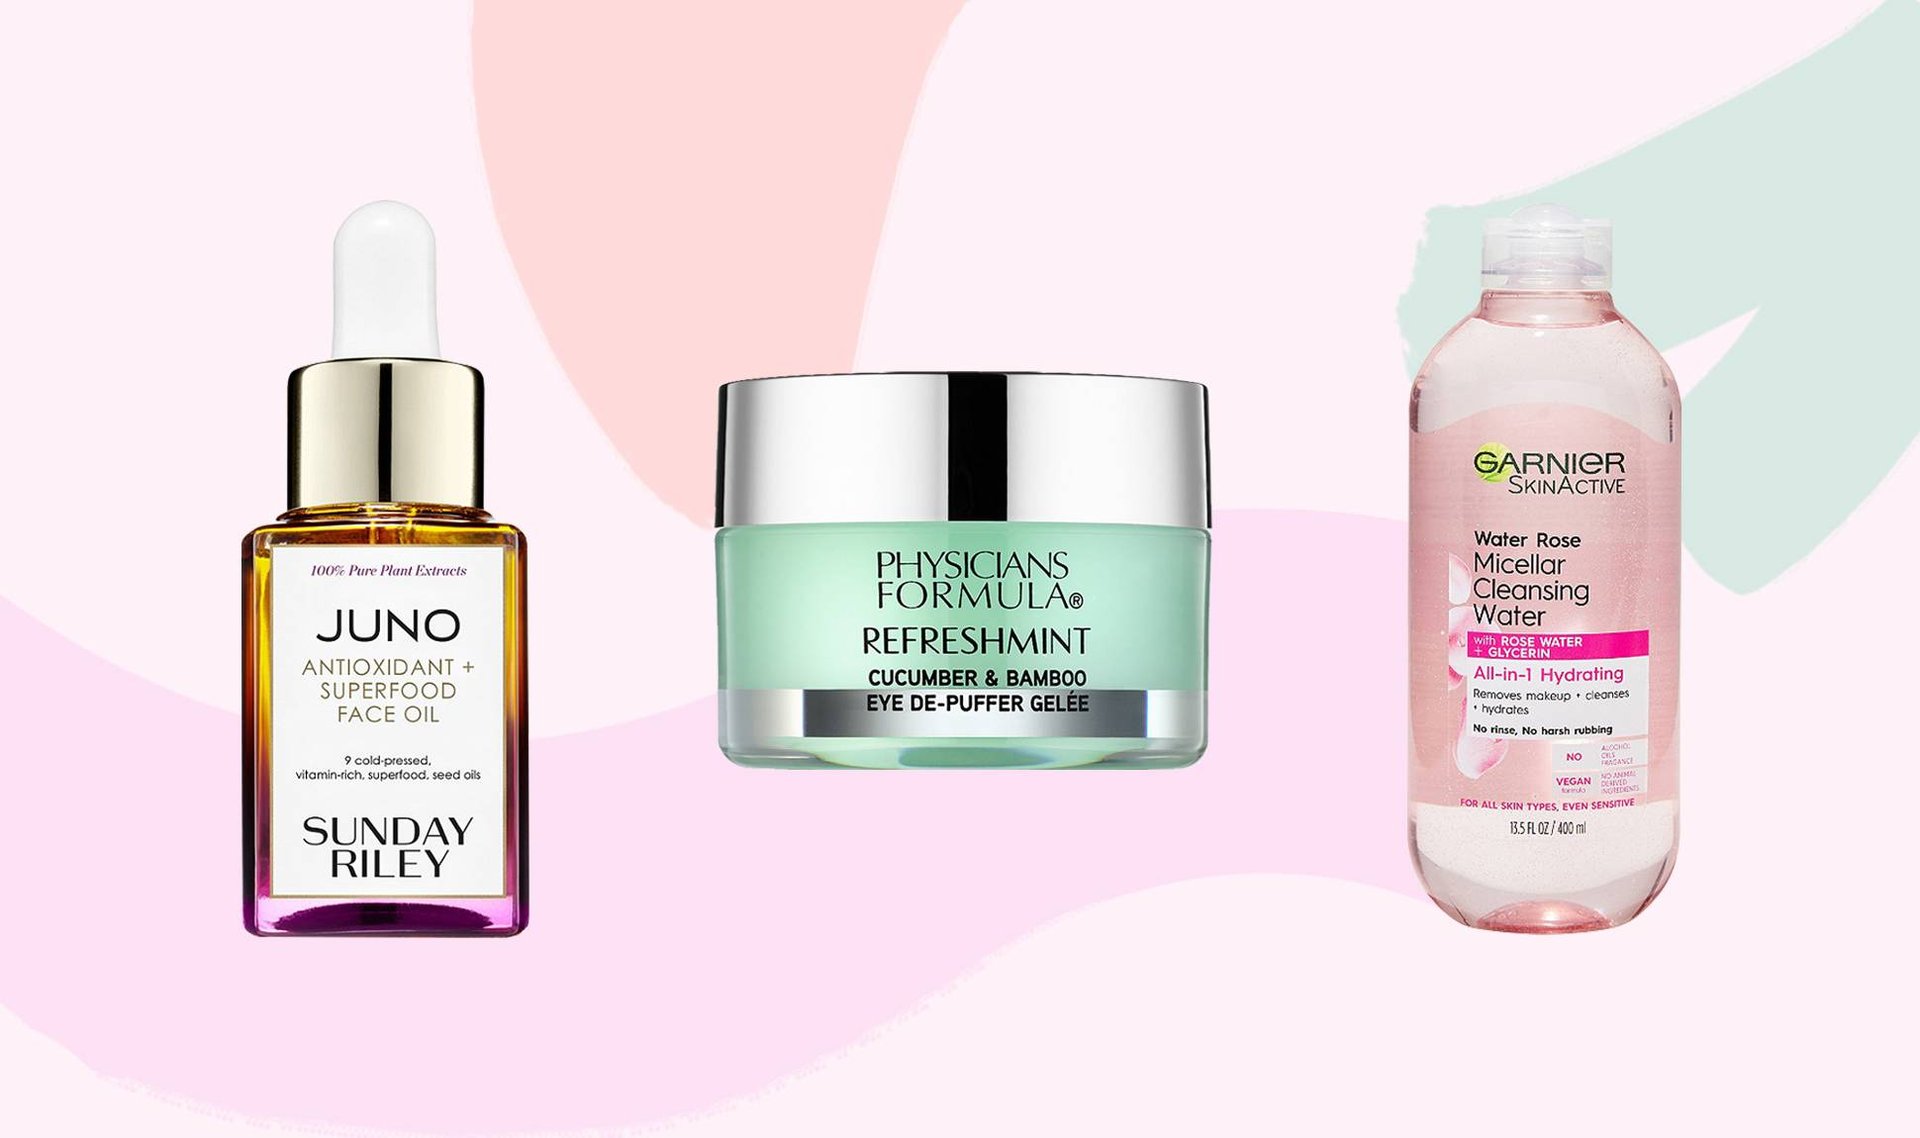 7 Skin-Care Products to Buy at Ulta Beauty This September